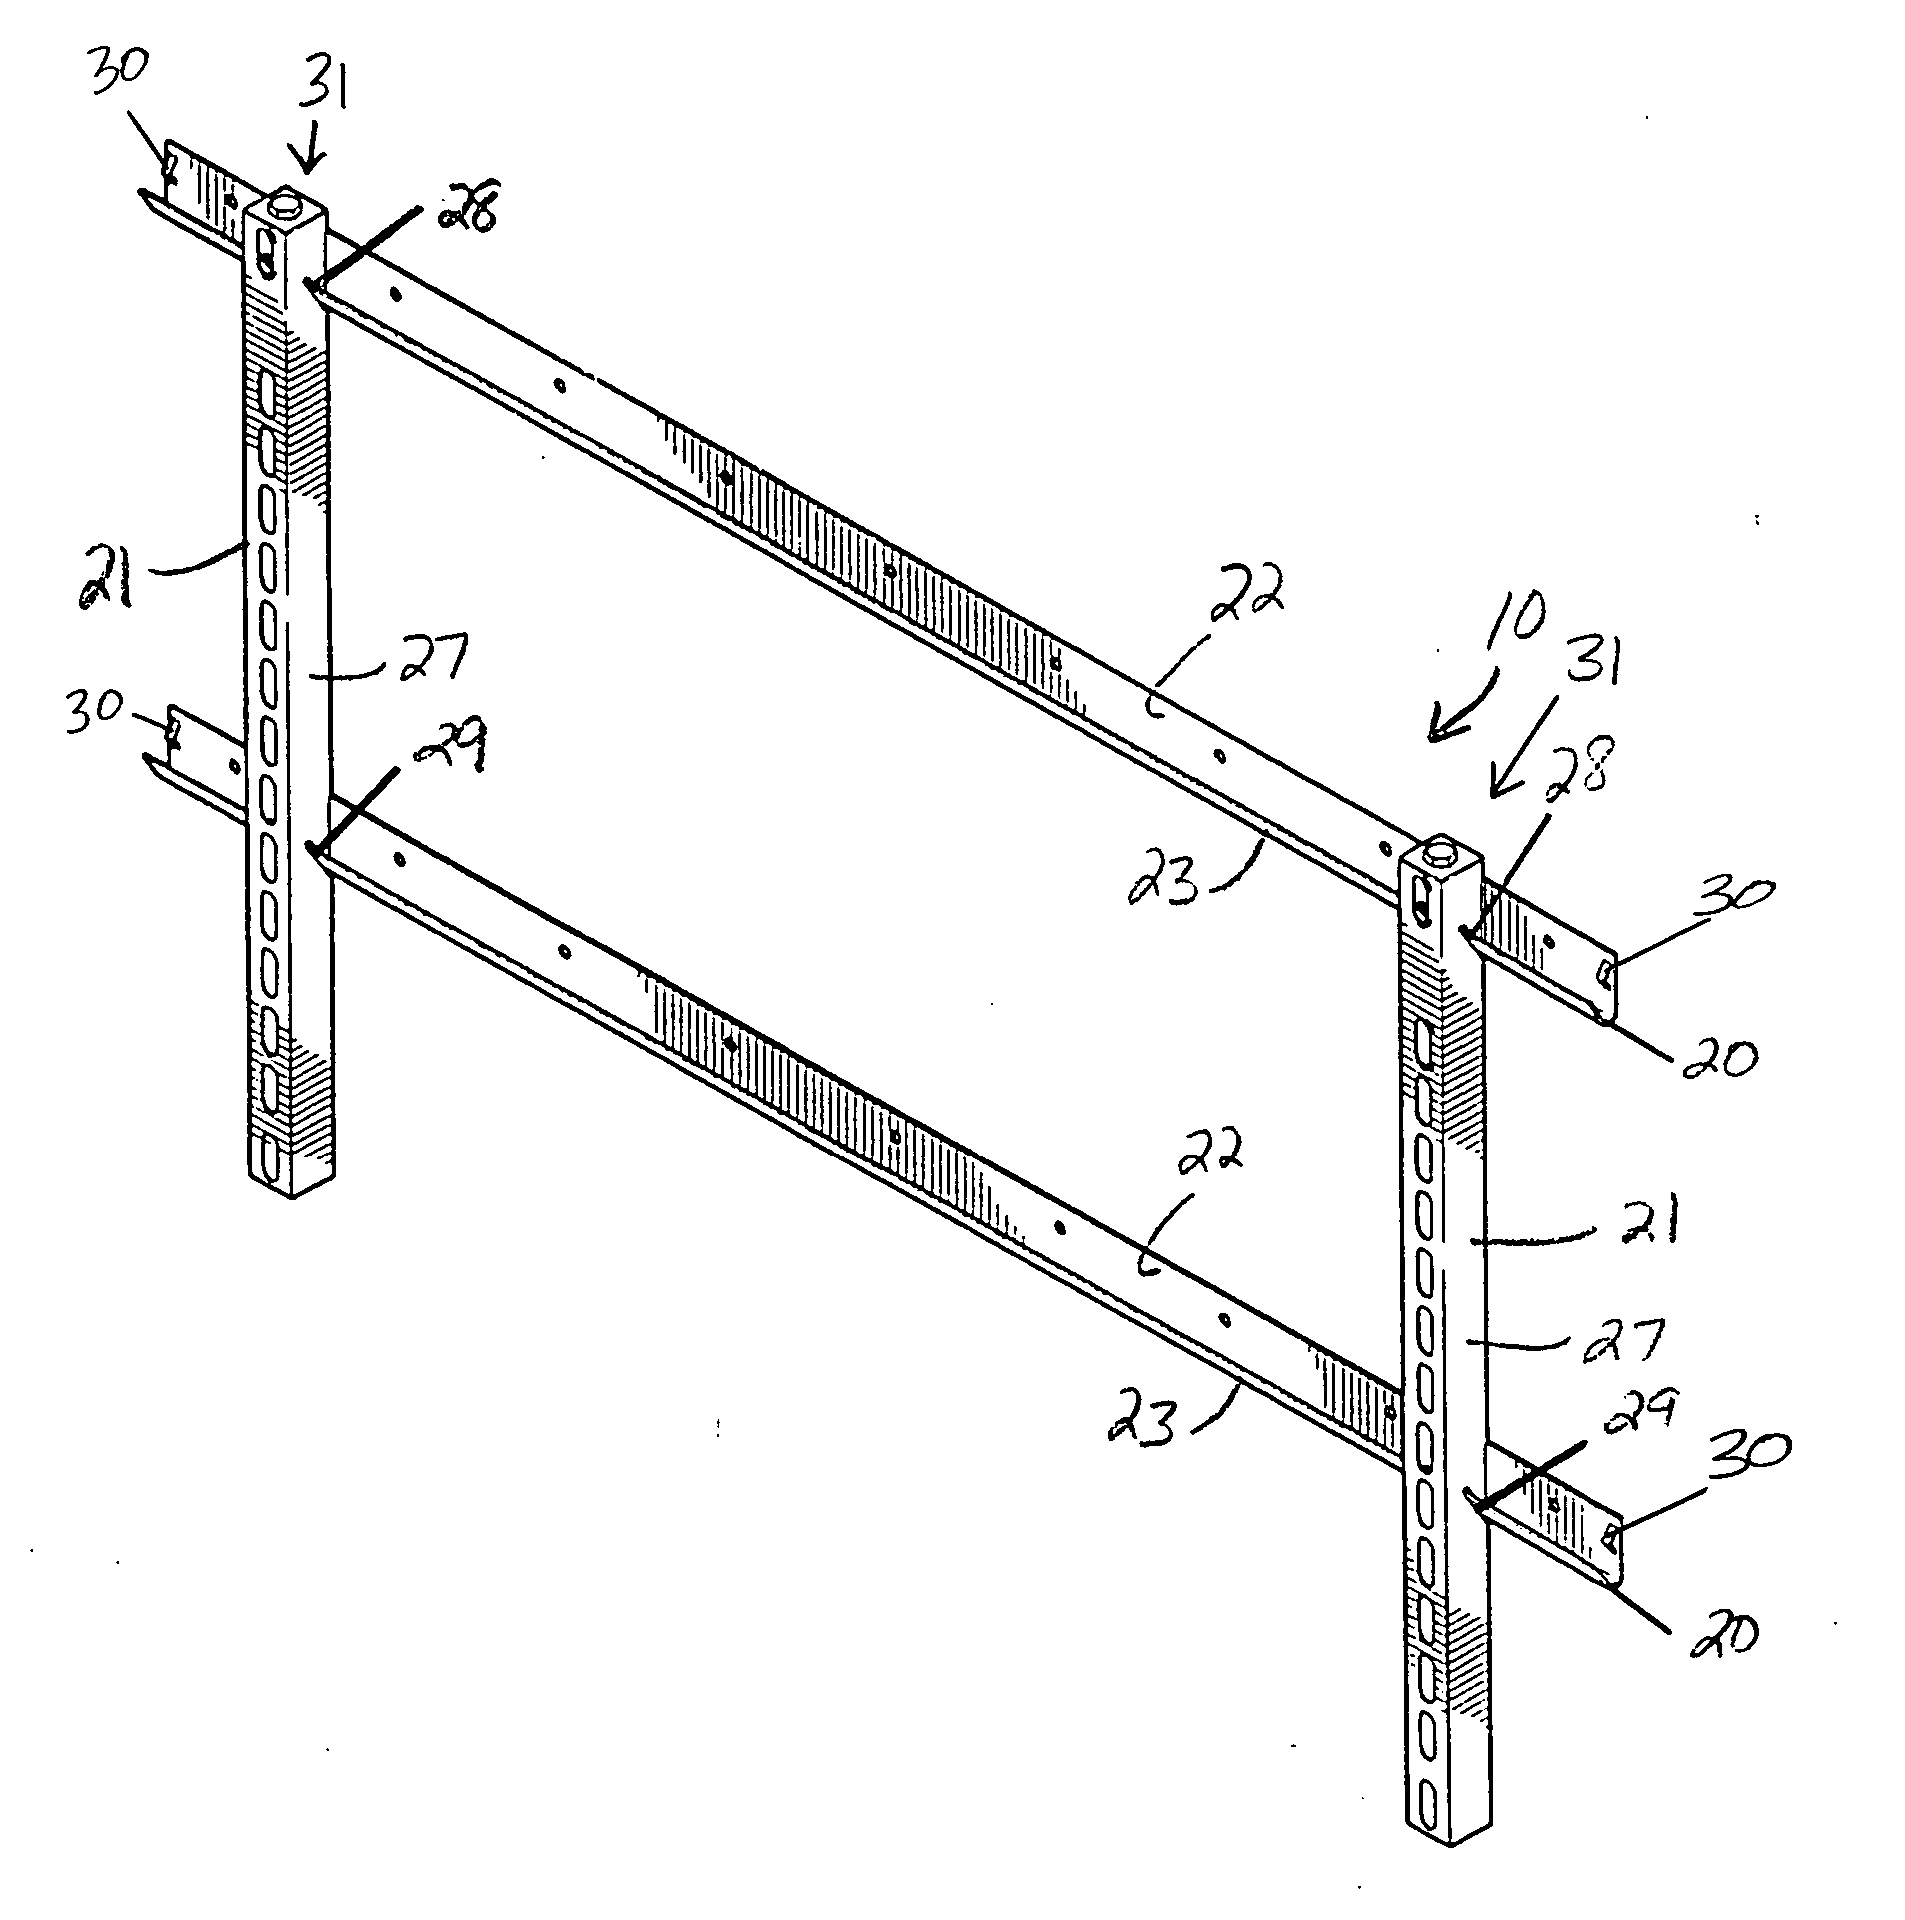 Flat panel television mounting assembly, and method